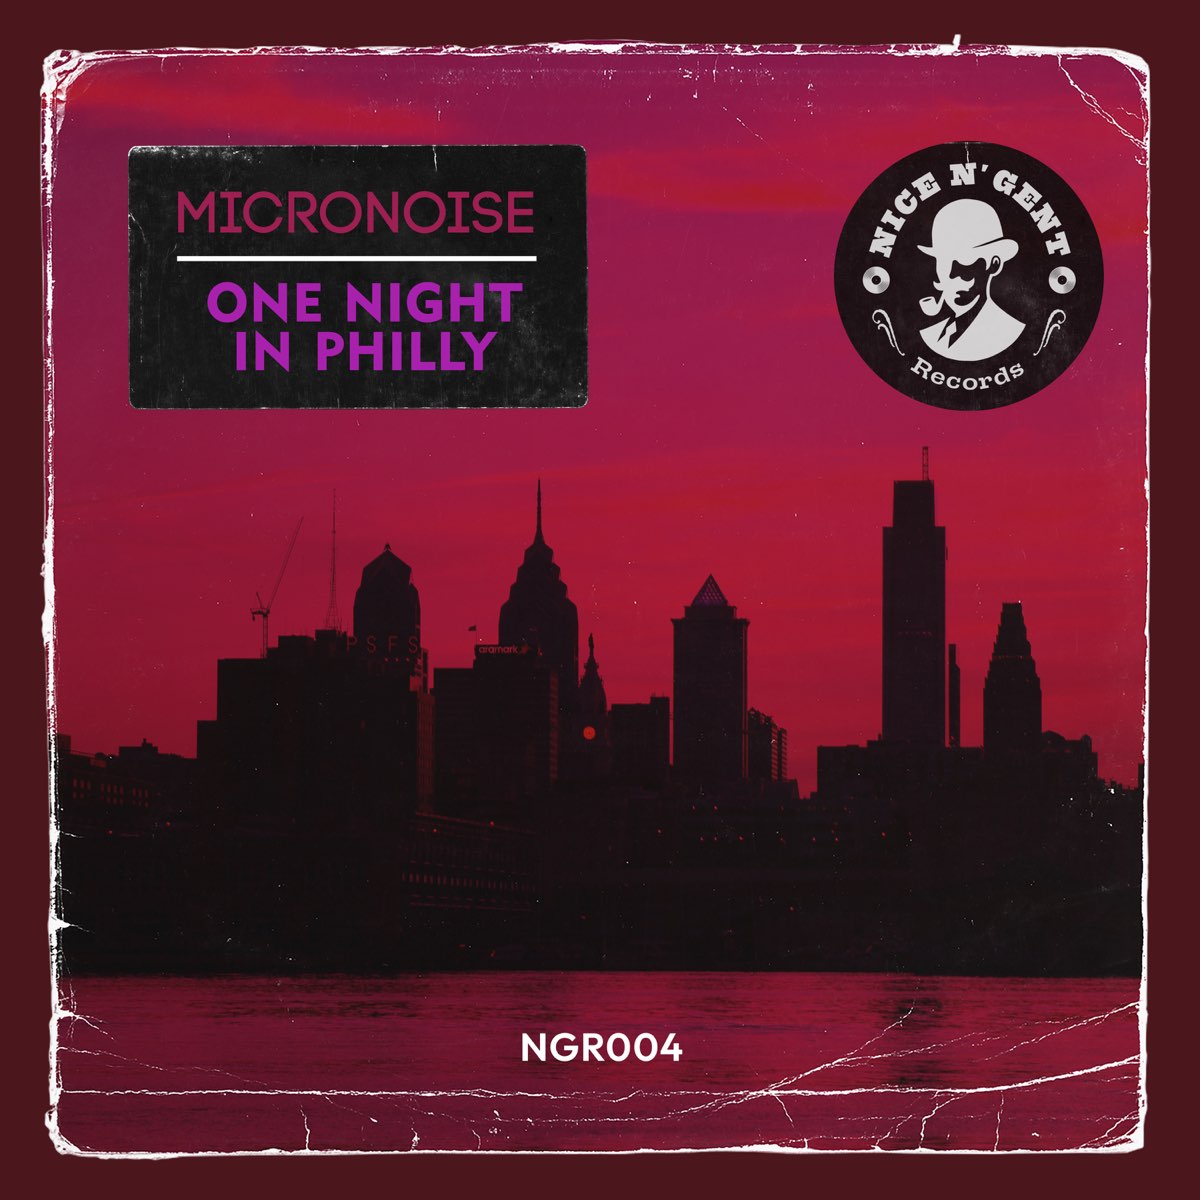 One Night in Philly - Single by Micronoise on Apple Music